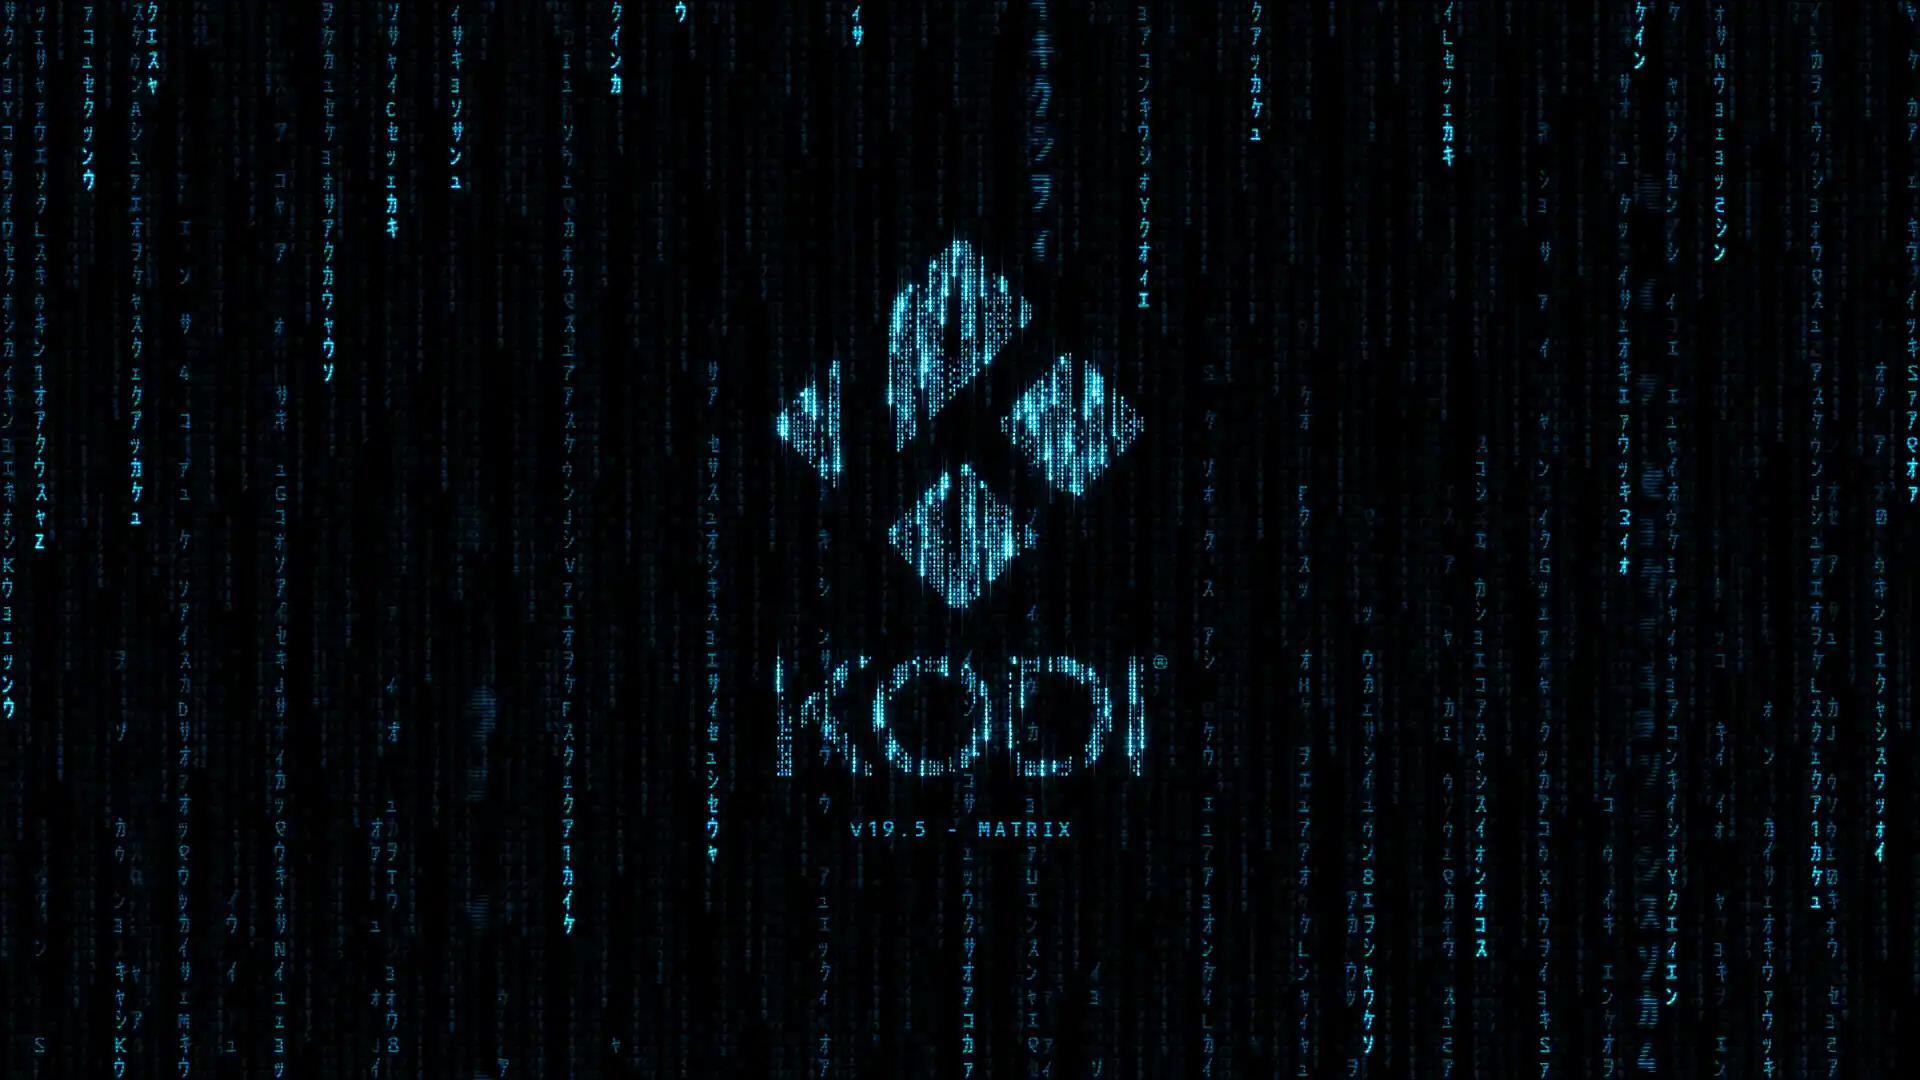 Kodi 19.5 "Matrix" Splash Screen - a blue Kodi logo sits in the centre, surrounded and overlaid with a cascade of random computer characters, falling like rain from the top of the screen. Below the image, in blue text: "Kodi 19.4 - Matrix".